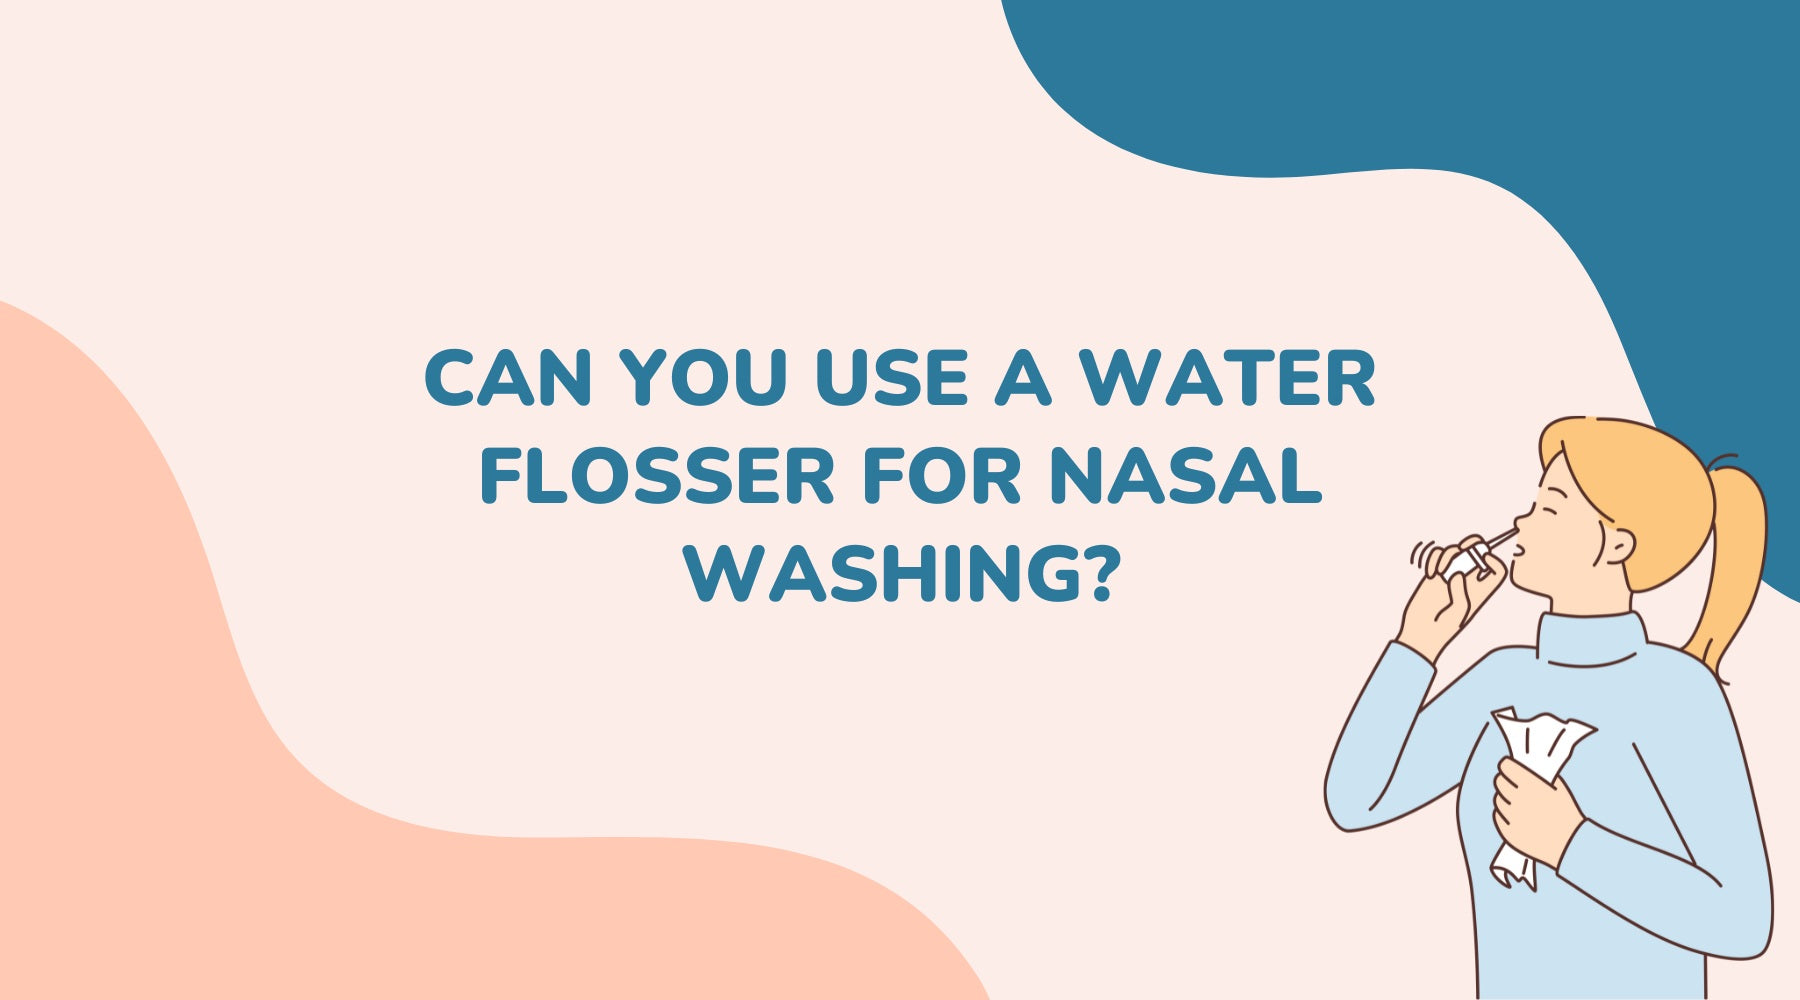 Can You Use a Water Flosser for Nasal Washing?